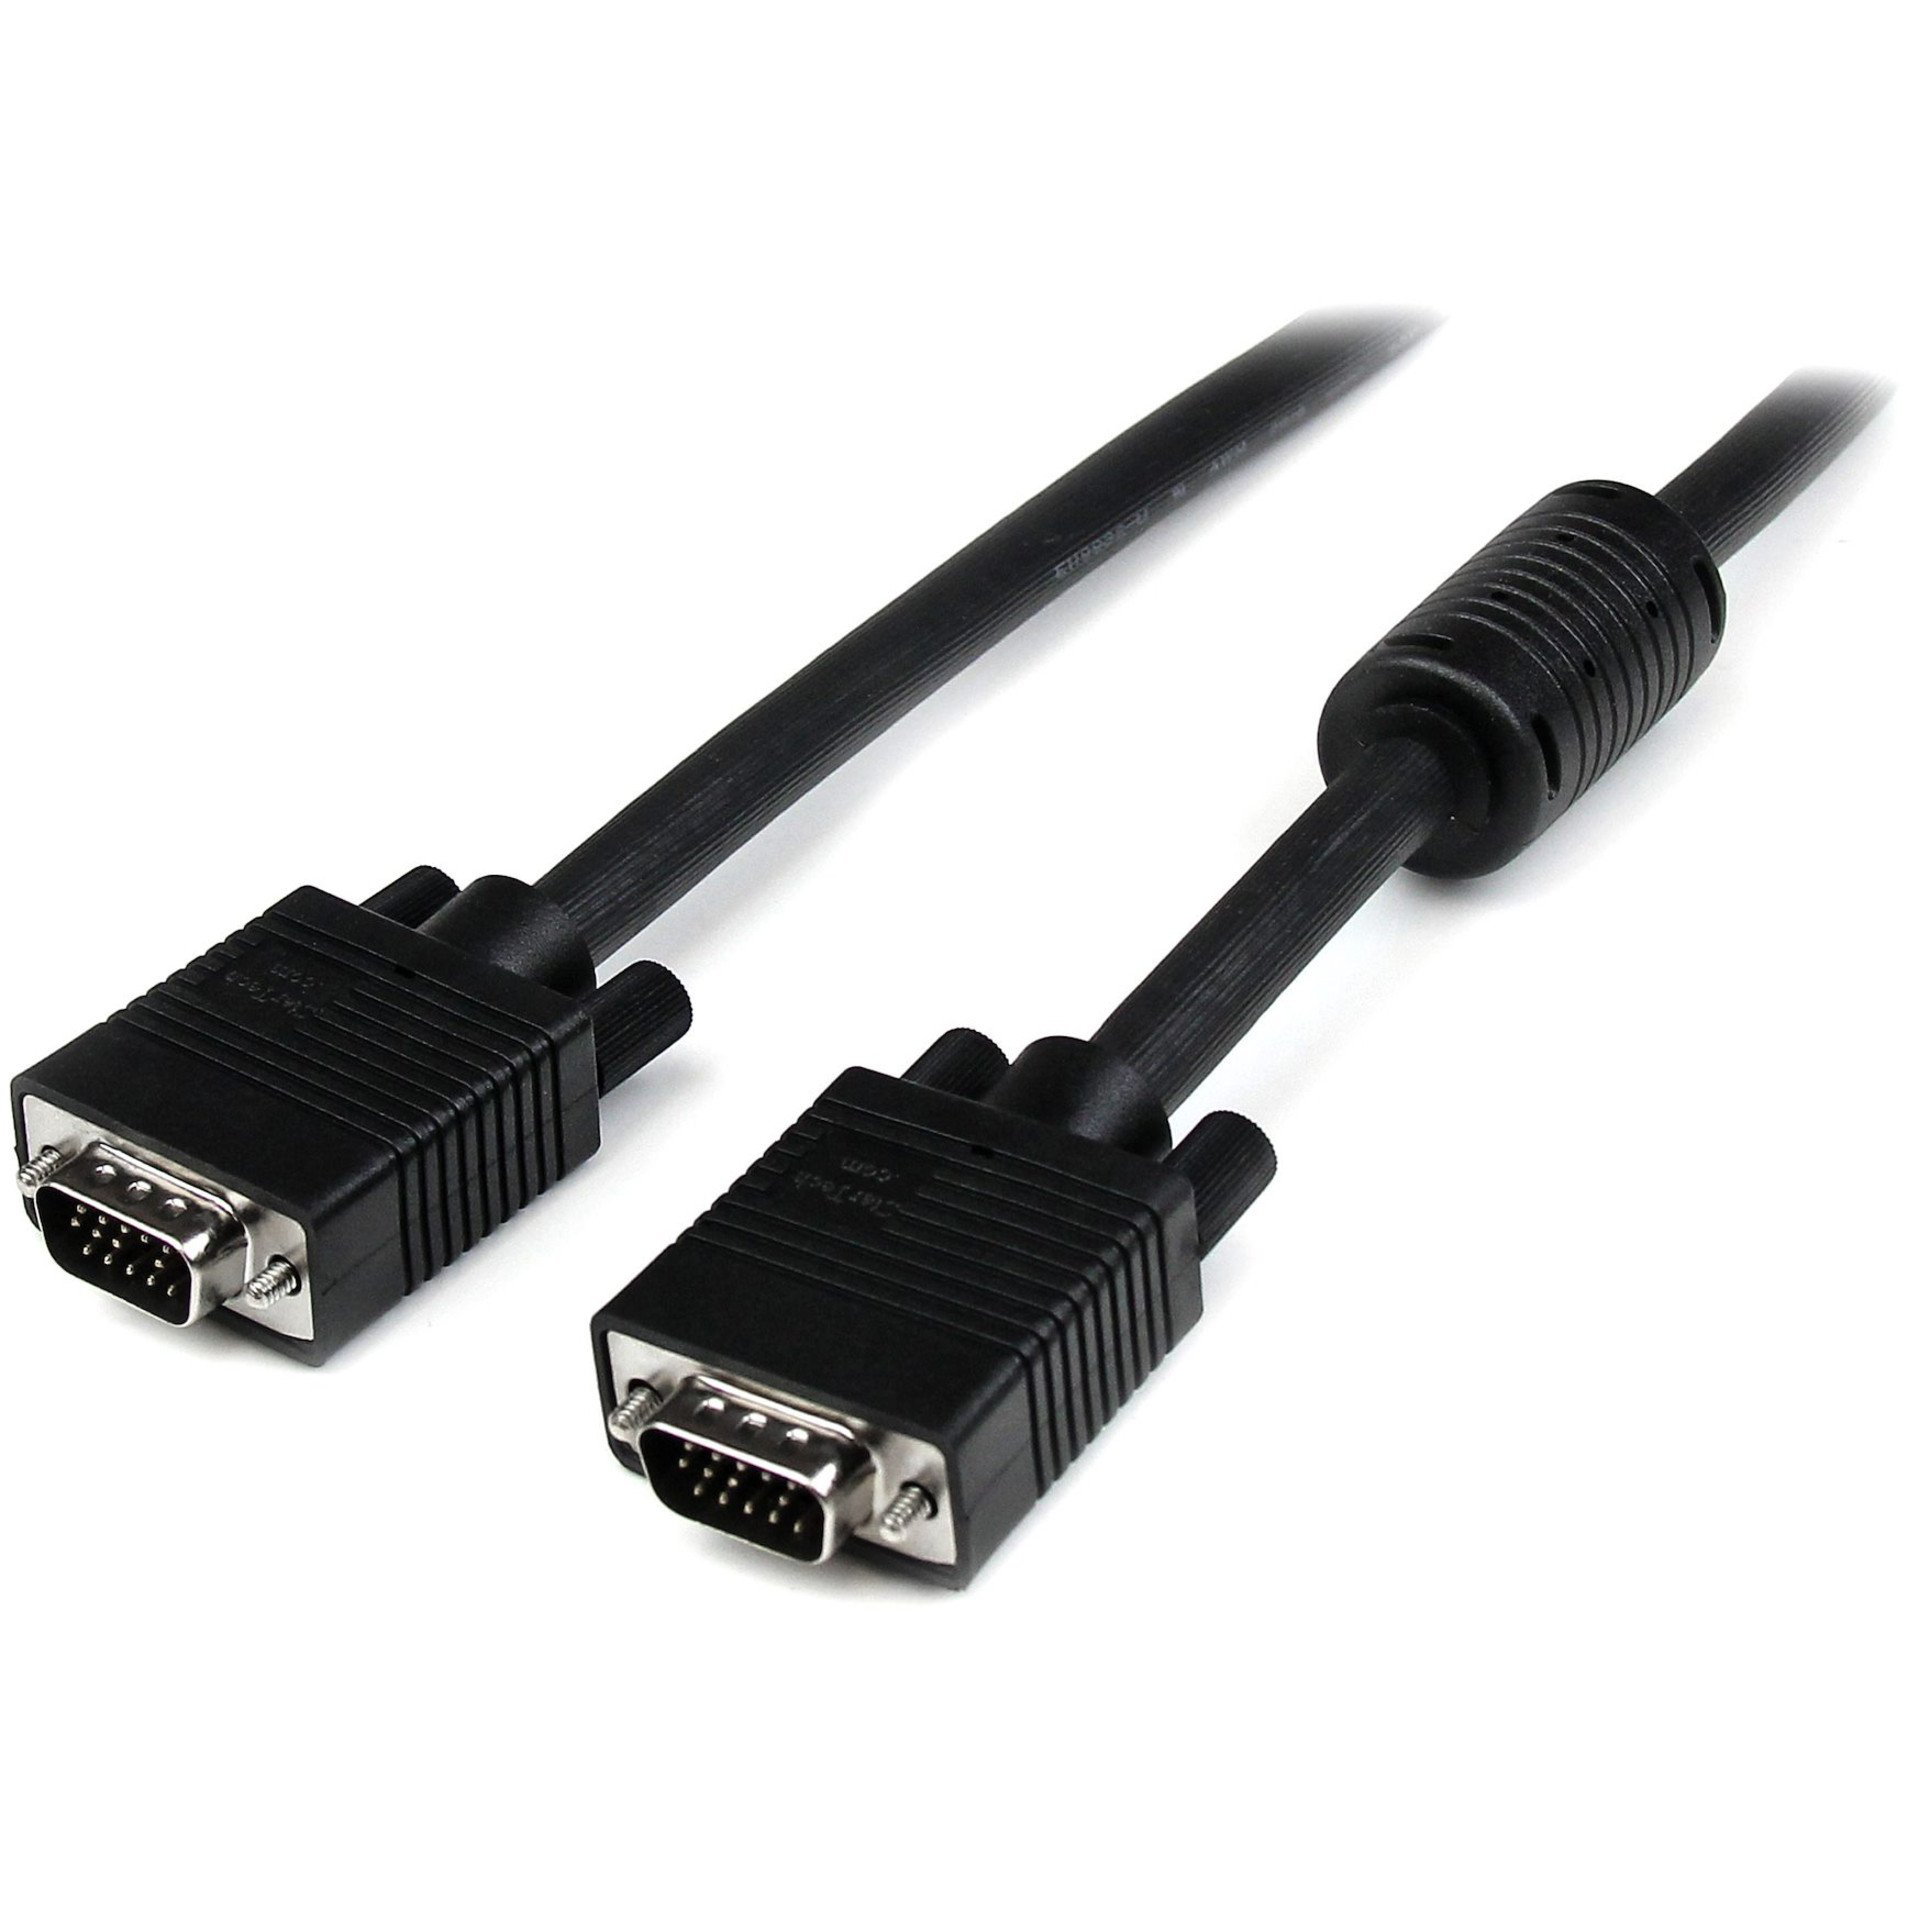 Startech .com 55 ft Coax High Resolution VGA Monitor CableHD15 M/MConnect your VGA monitor with the highest quality connection availab… MXT101MMHQ55